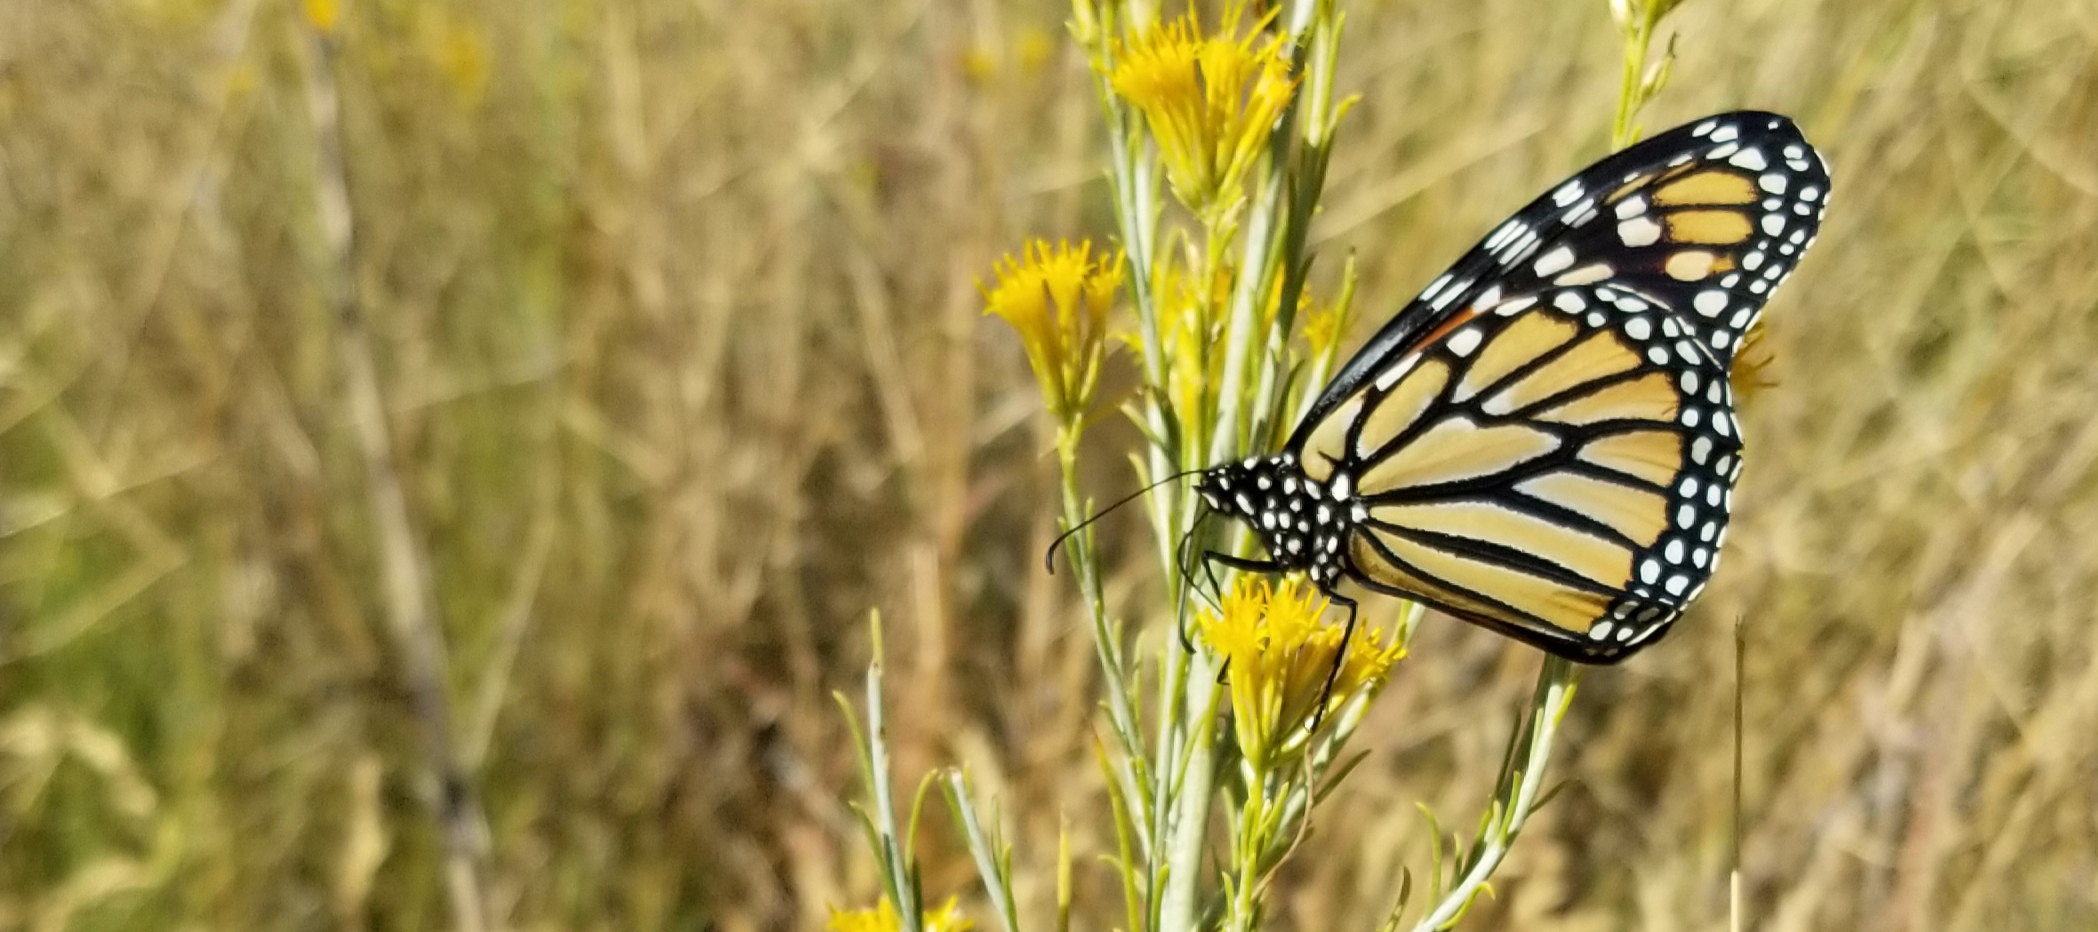 A monarch perches on a stalk of yellow flowers in a dry, grassy area.